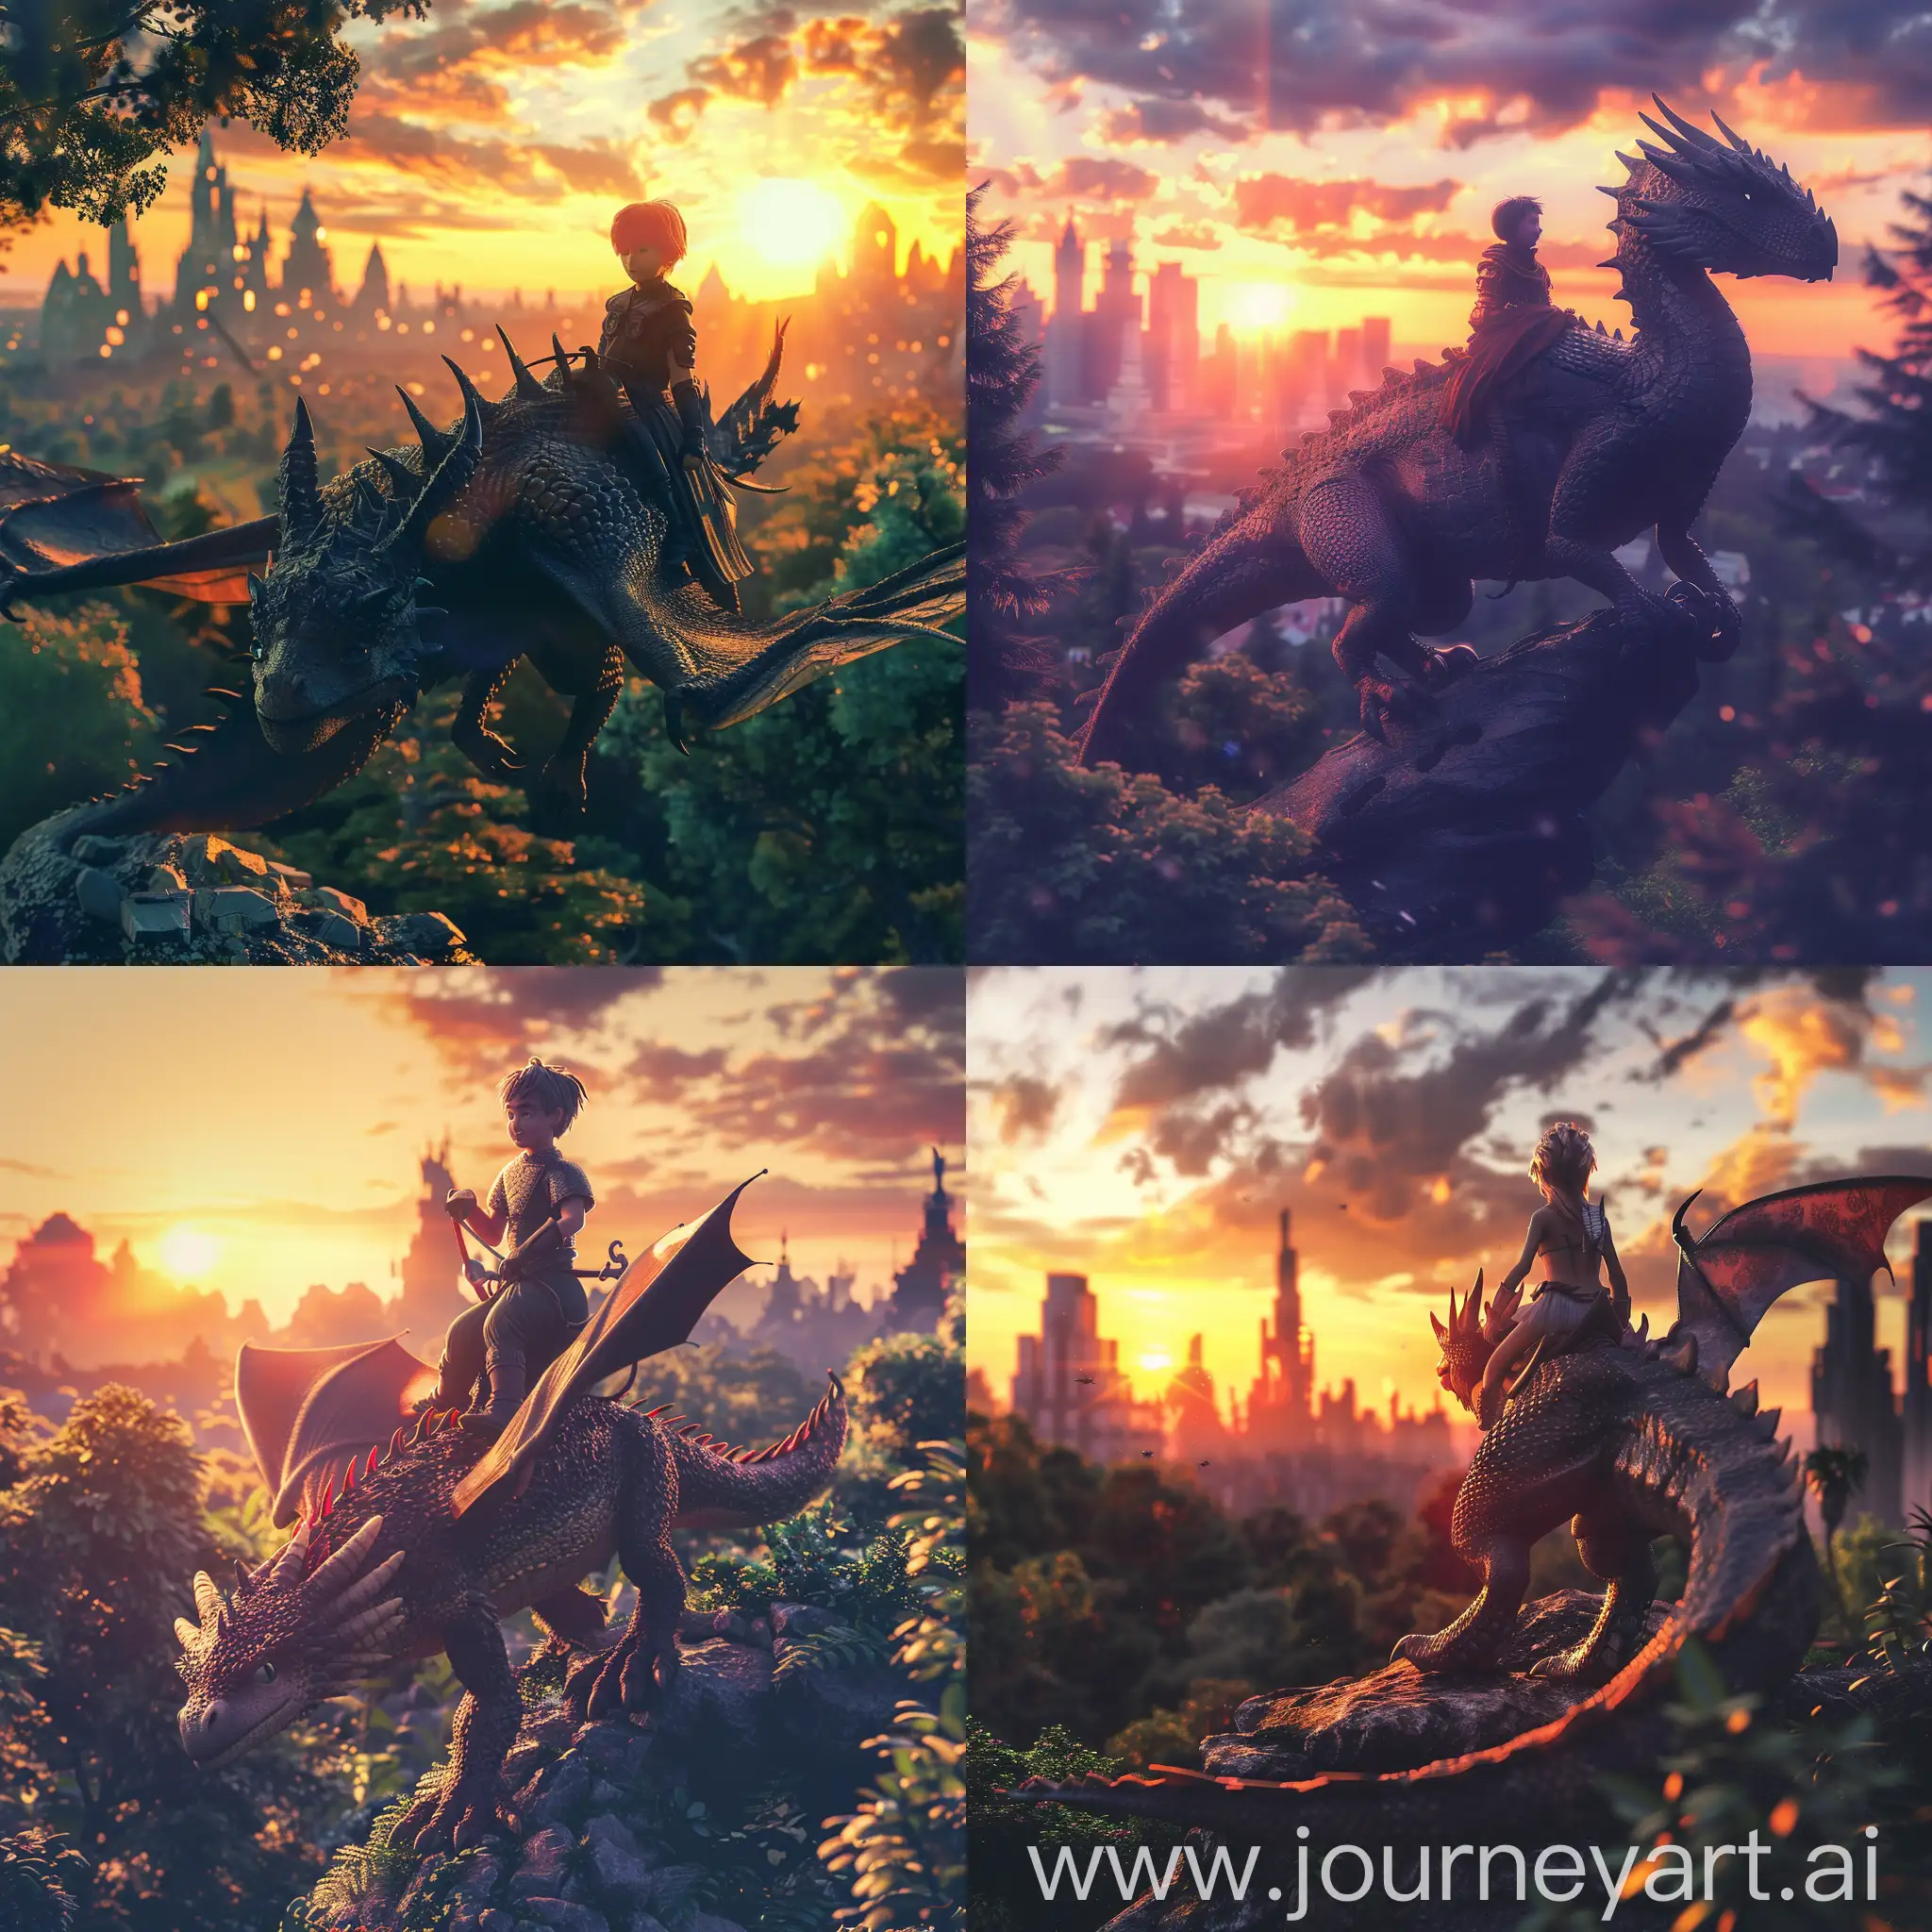 dragon, sunset, friendly, human riding dragon, fantasy city in the background, nature, Forrest, lush, fun, hyper realistic, 4k--v4--ardragon, sunset, friendly, human riding dragon, fantasy city in the background, nature, Forrest, lush, fun, hyper realistic, 4k--v4--ar